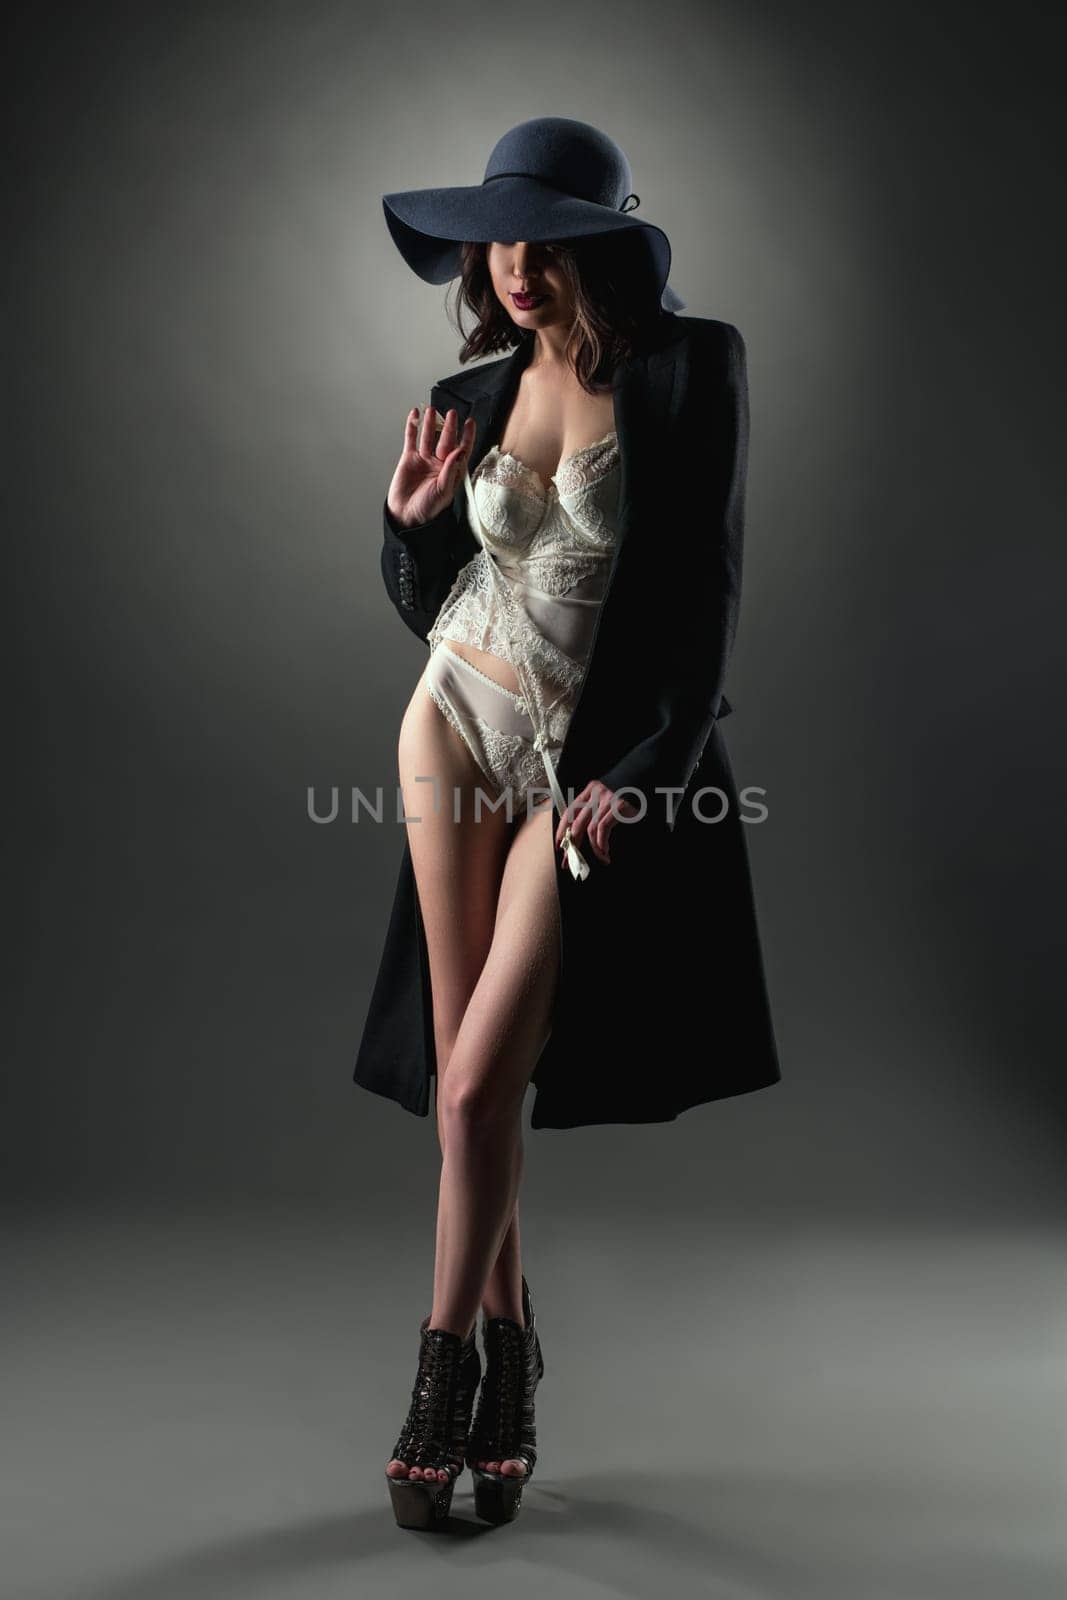 Model dressed in sexy lace lingerie, coat and hat by rivertime